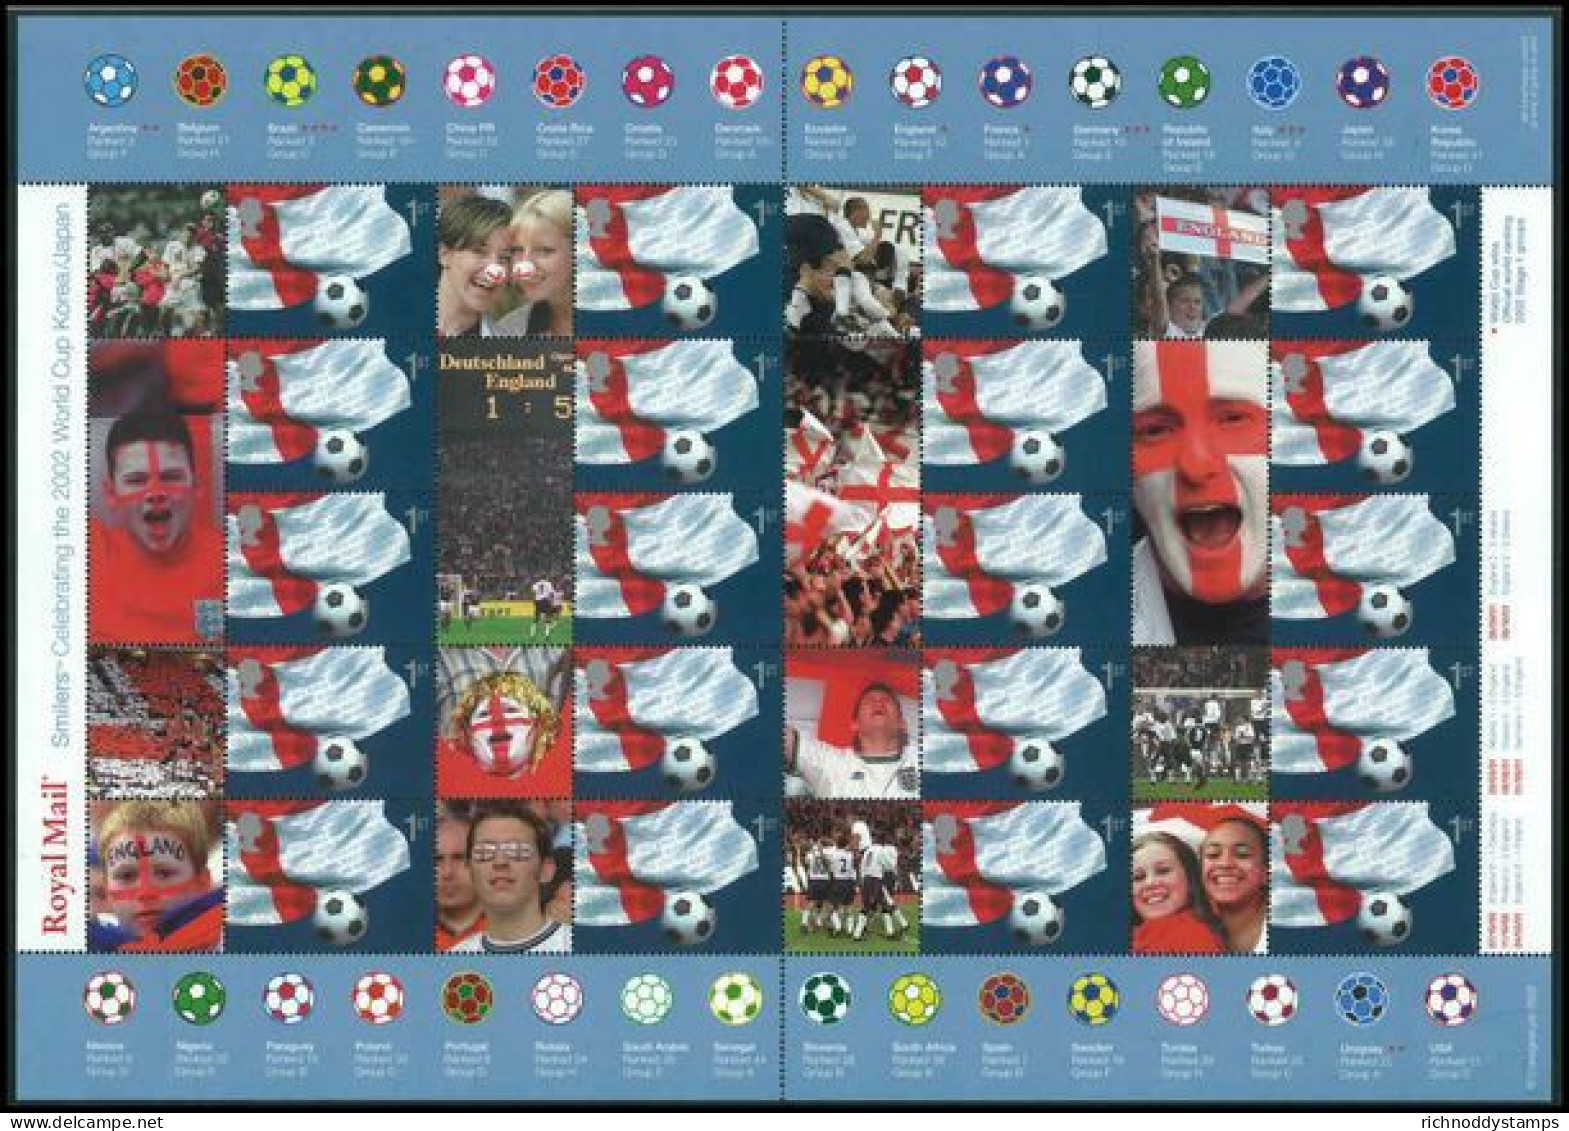 2002 Football World Cup Smilers Sheet Unmounted Mint. Imprinted Consignia Plc 2002unmounted Mint - Francobolli Personalizzati